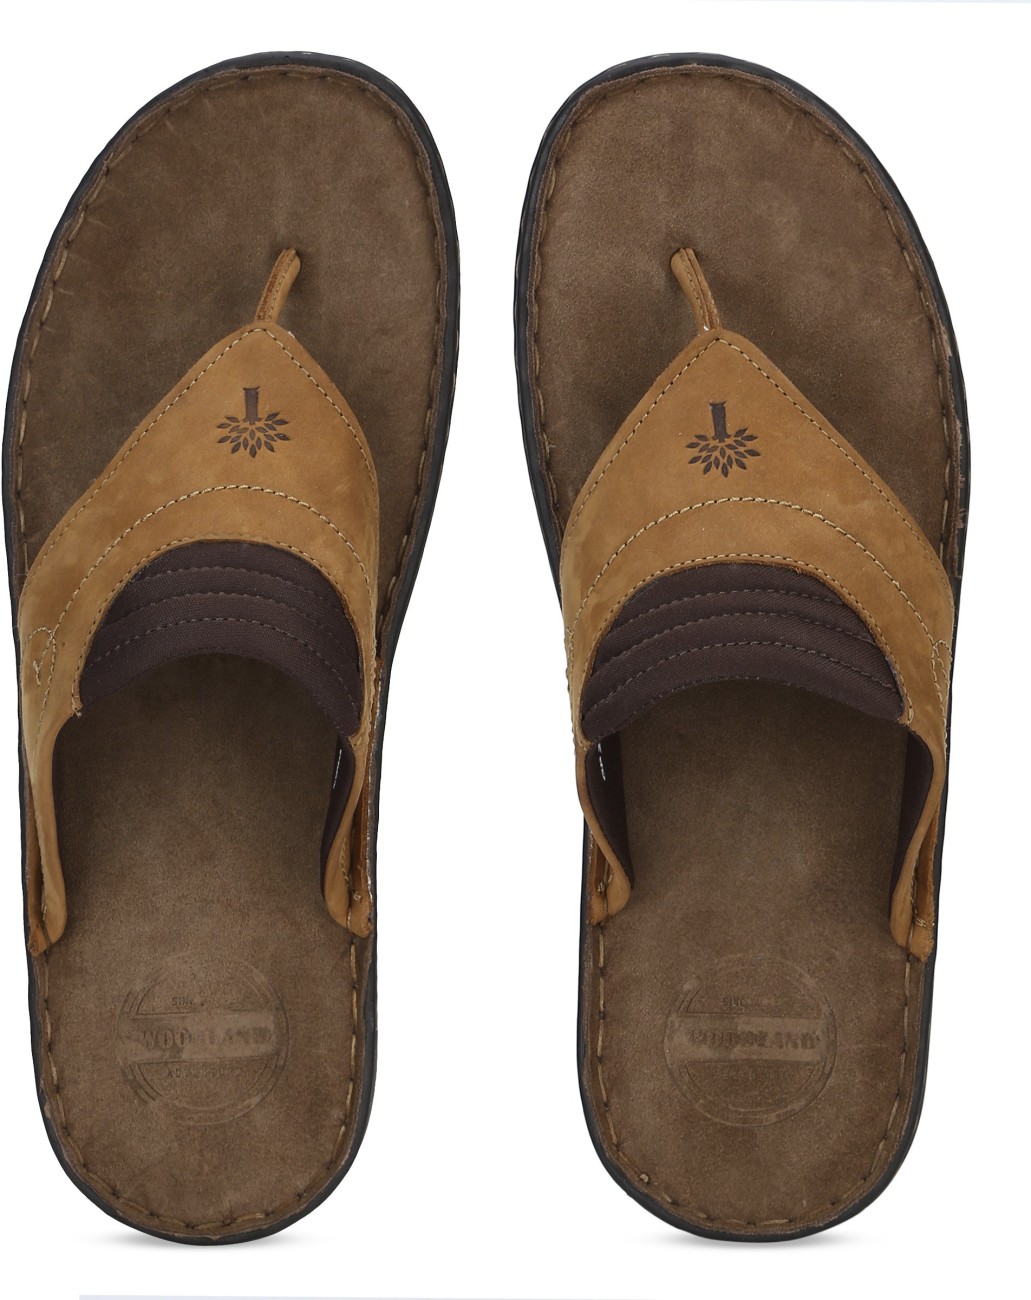 woodland slippers online